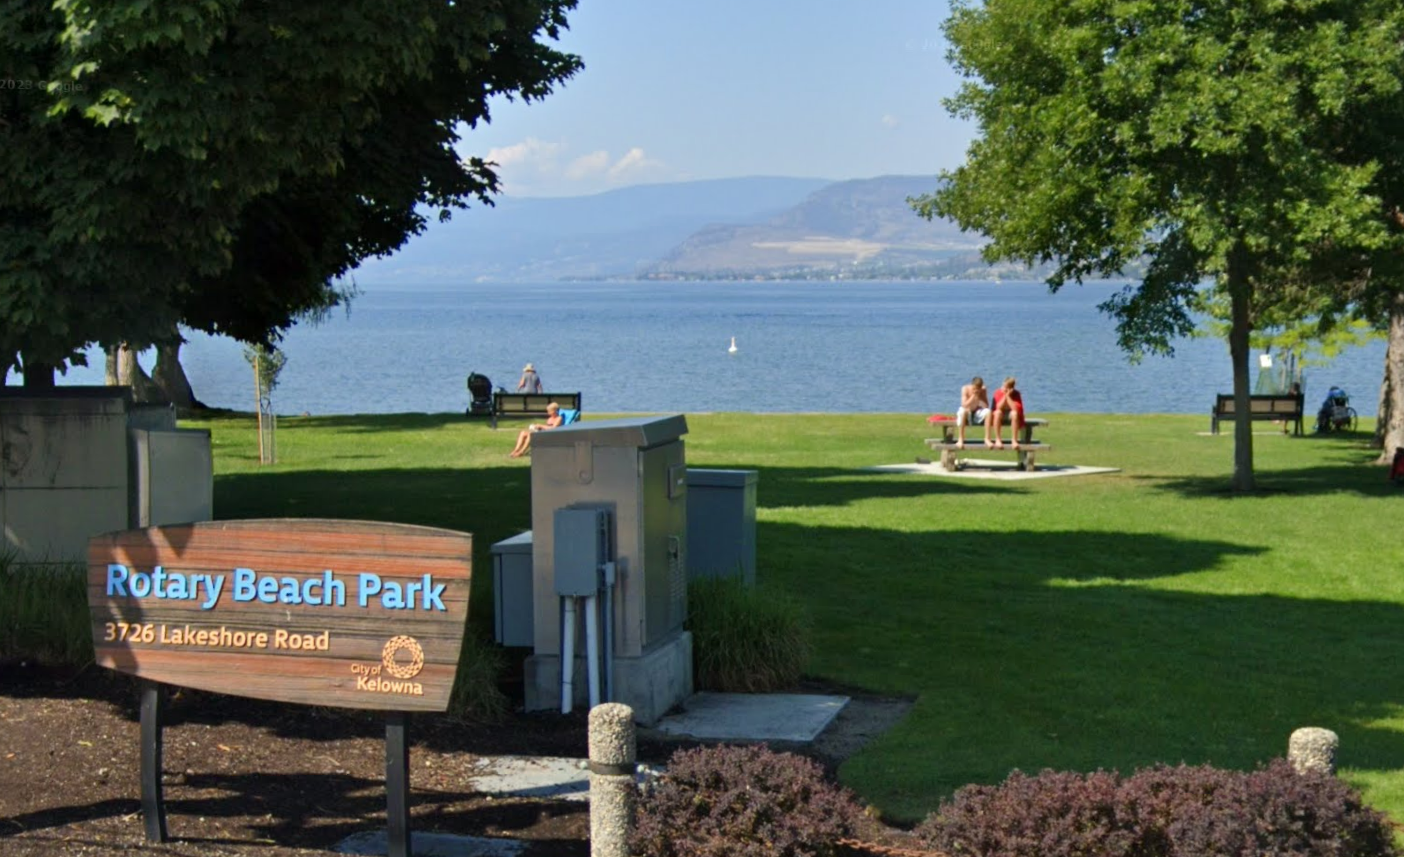 Booze on beach locations could increase to 8 in Kelowna